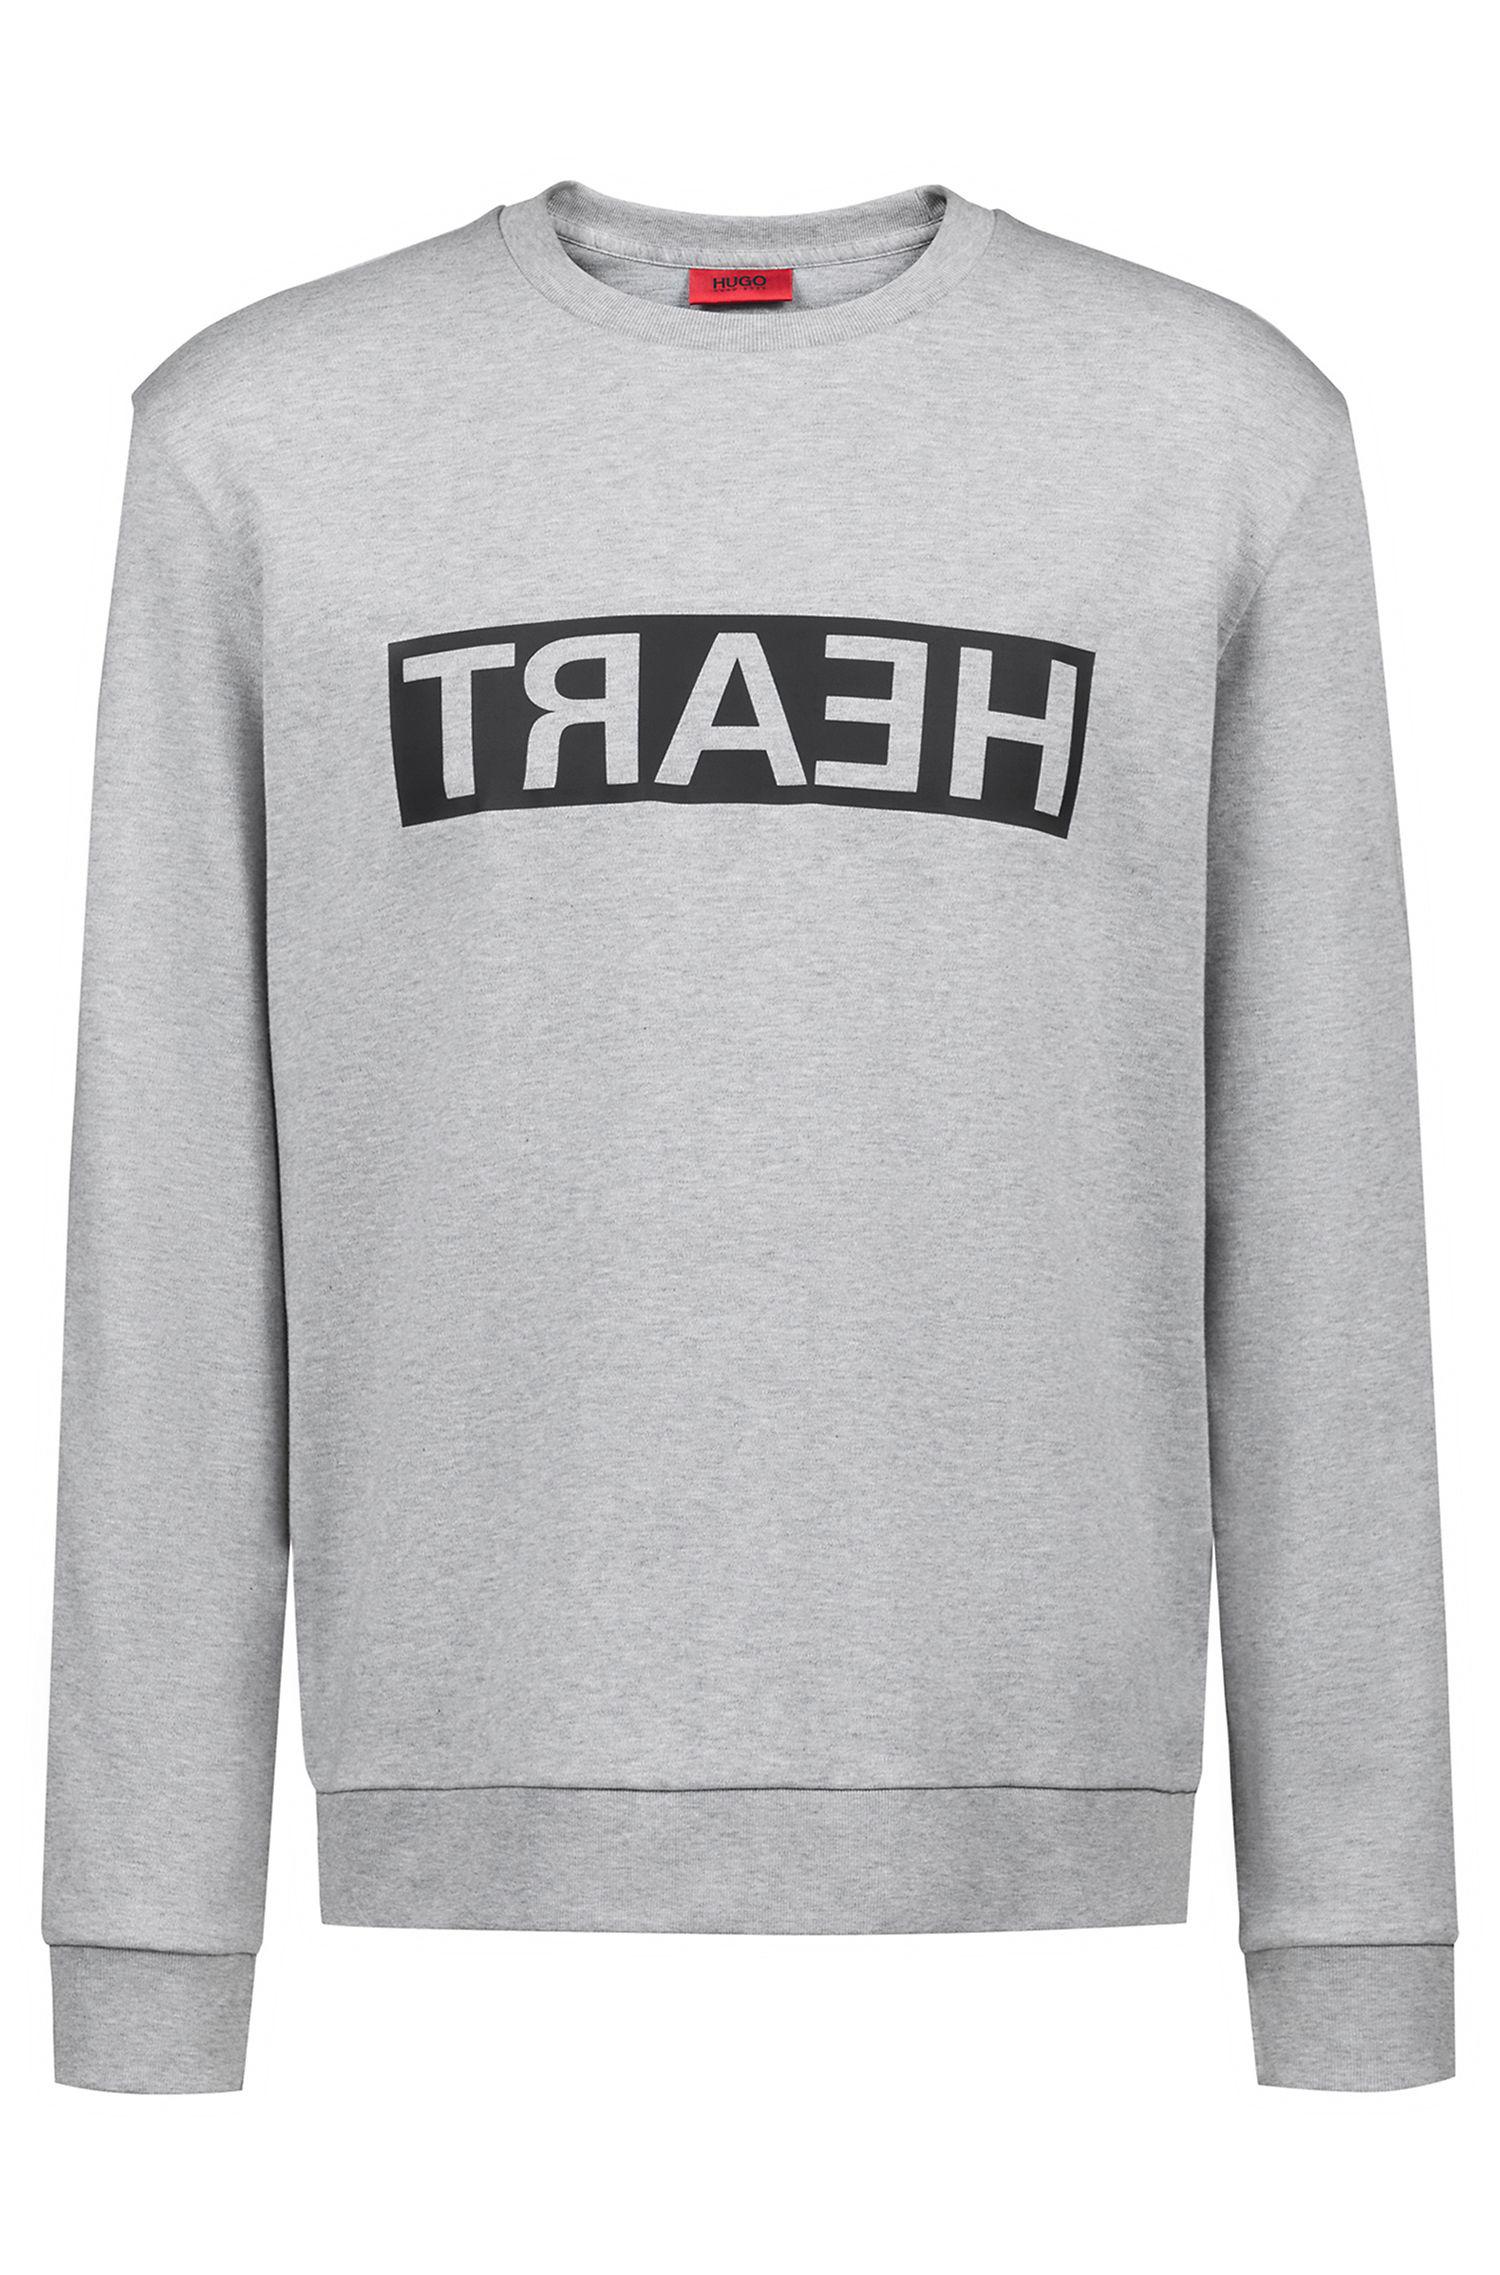 HUGO Unisex Cotton Sweatshirt With Reversed Personalisation in Gray for ...